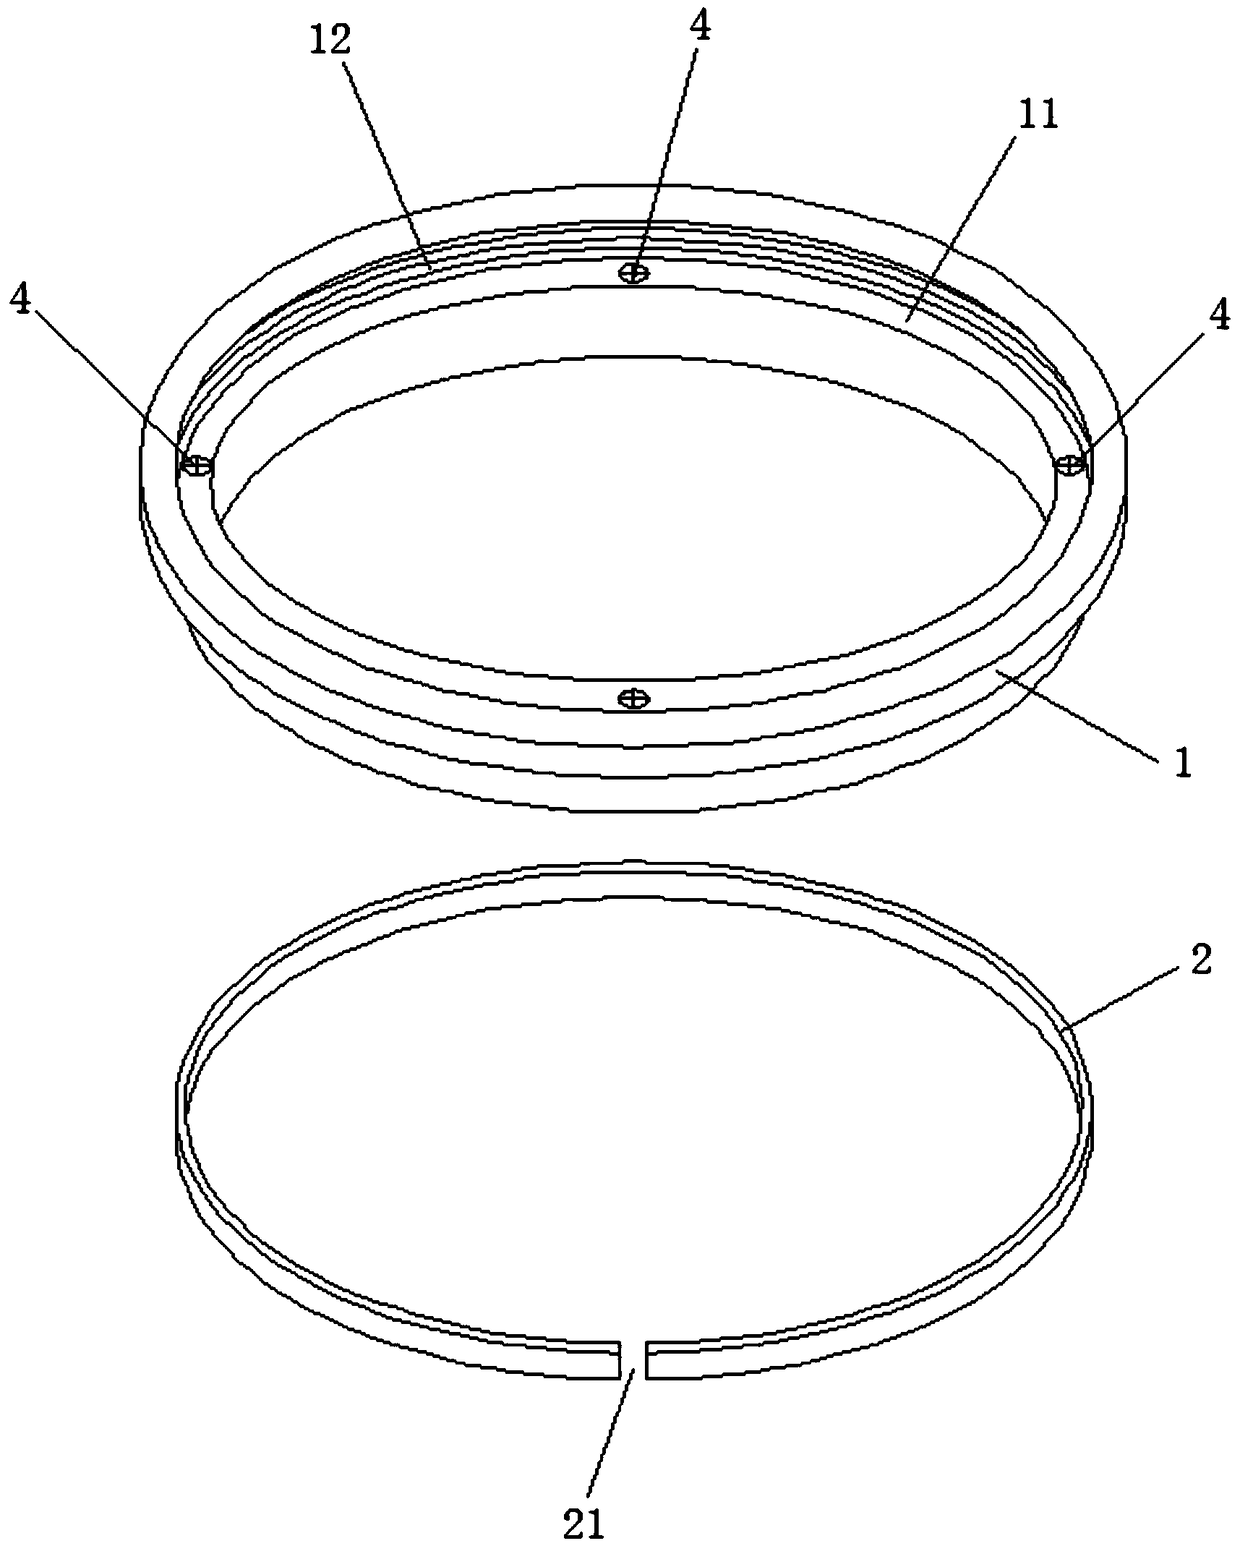 A lens adapter ring